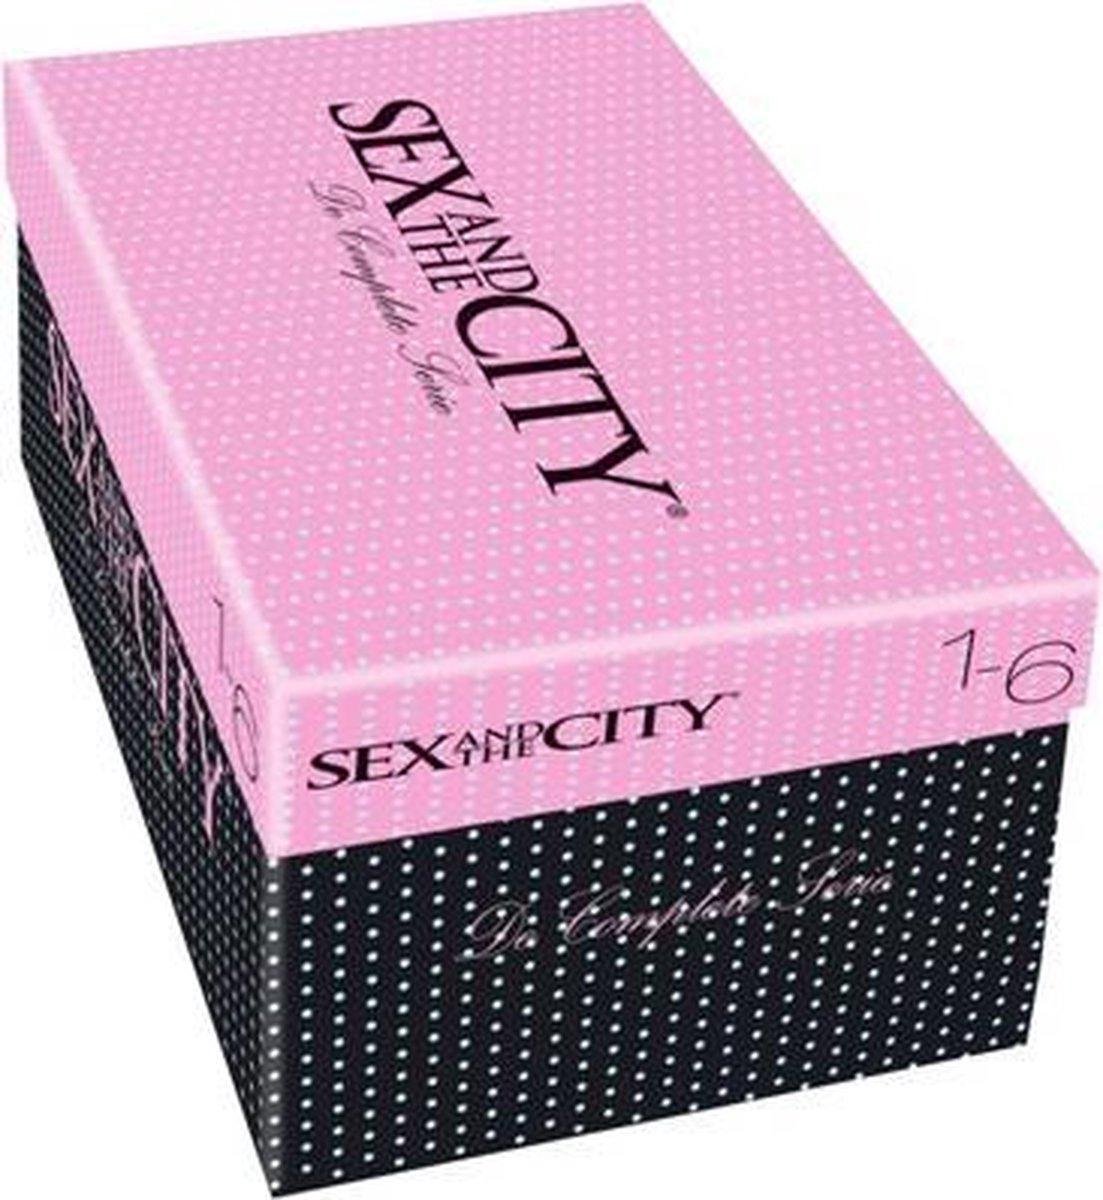 Sex and the City - Complete Serie (The Shoebox) (import met